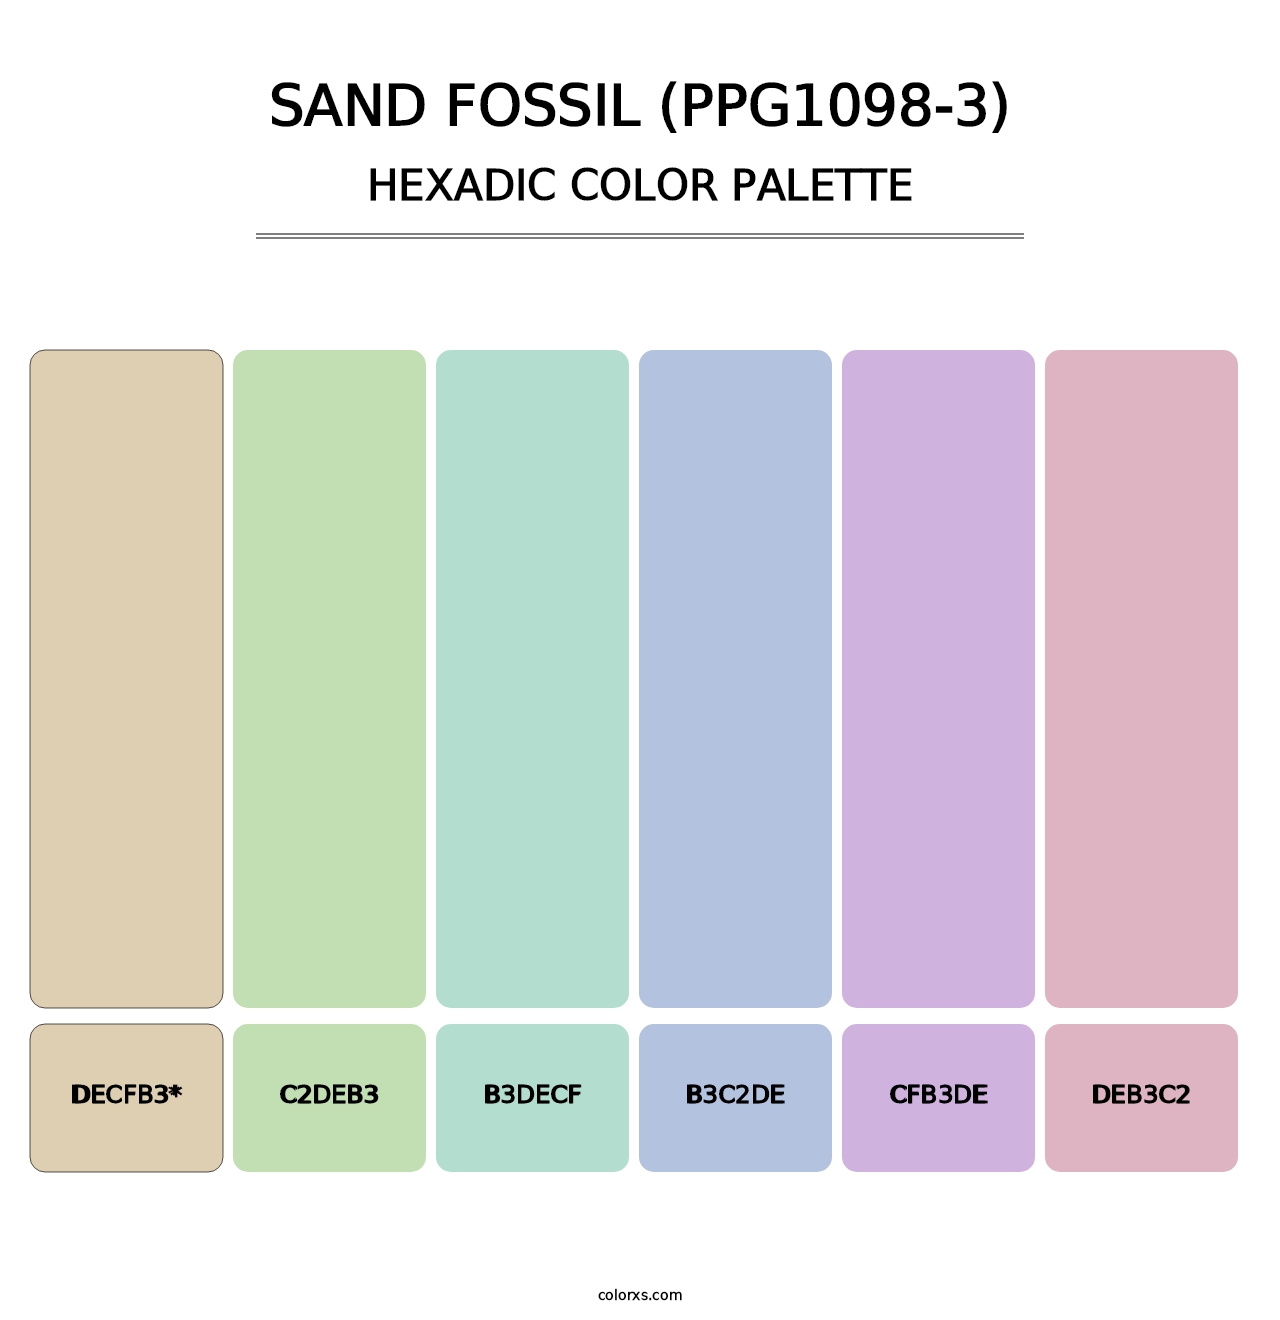 Sand Fossil (PPG1098-3) - Hexadic Color Palette